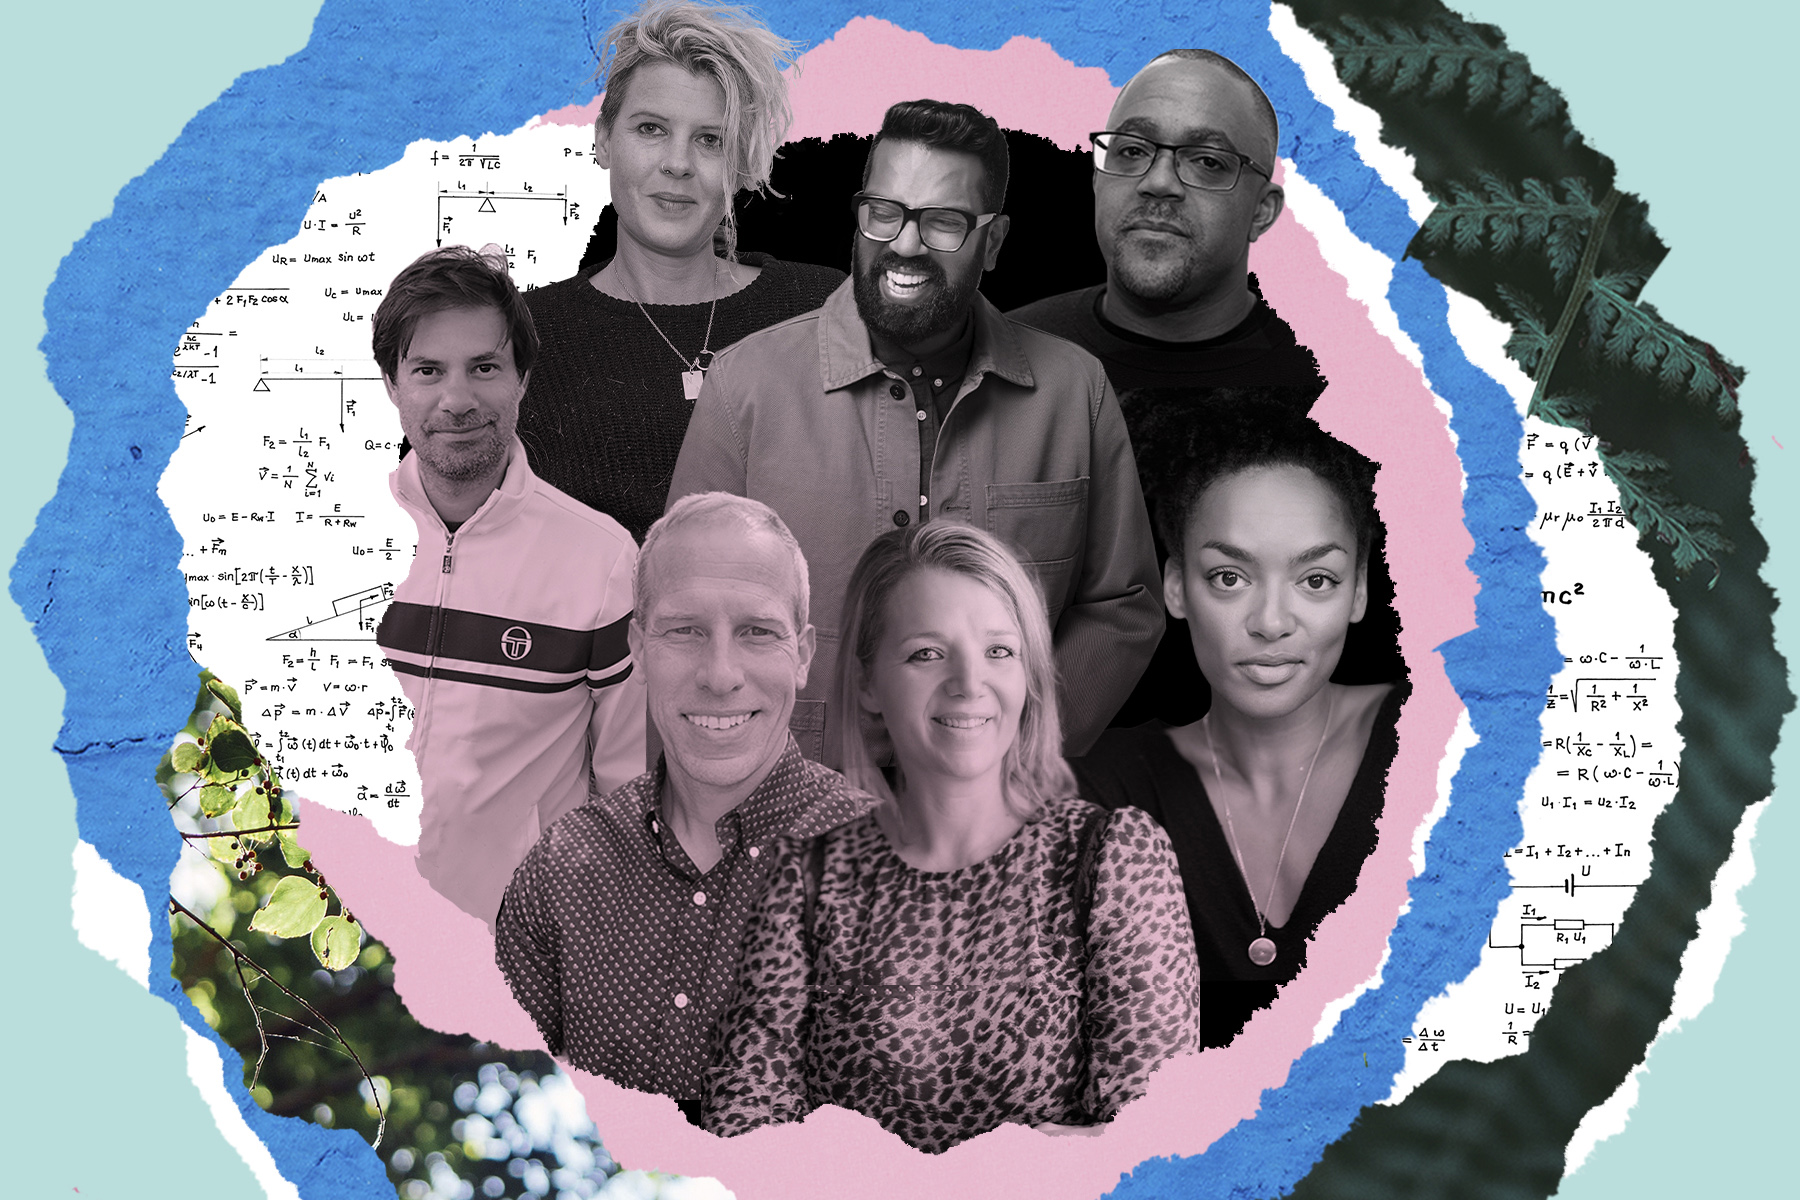 A photo collage of authors Romesh Ranganathan, Clover Stroud, Sam Copeland and more in a series of rough concentric circles.